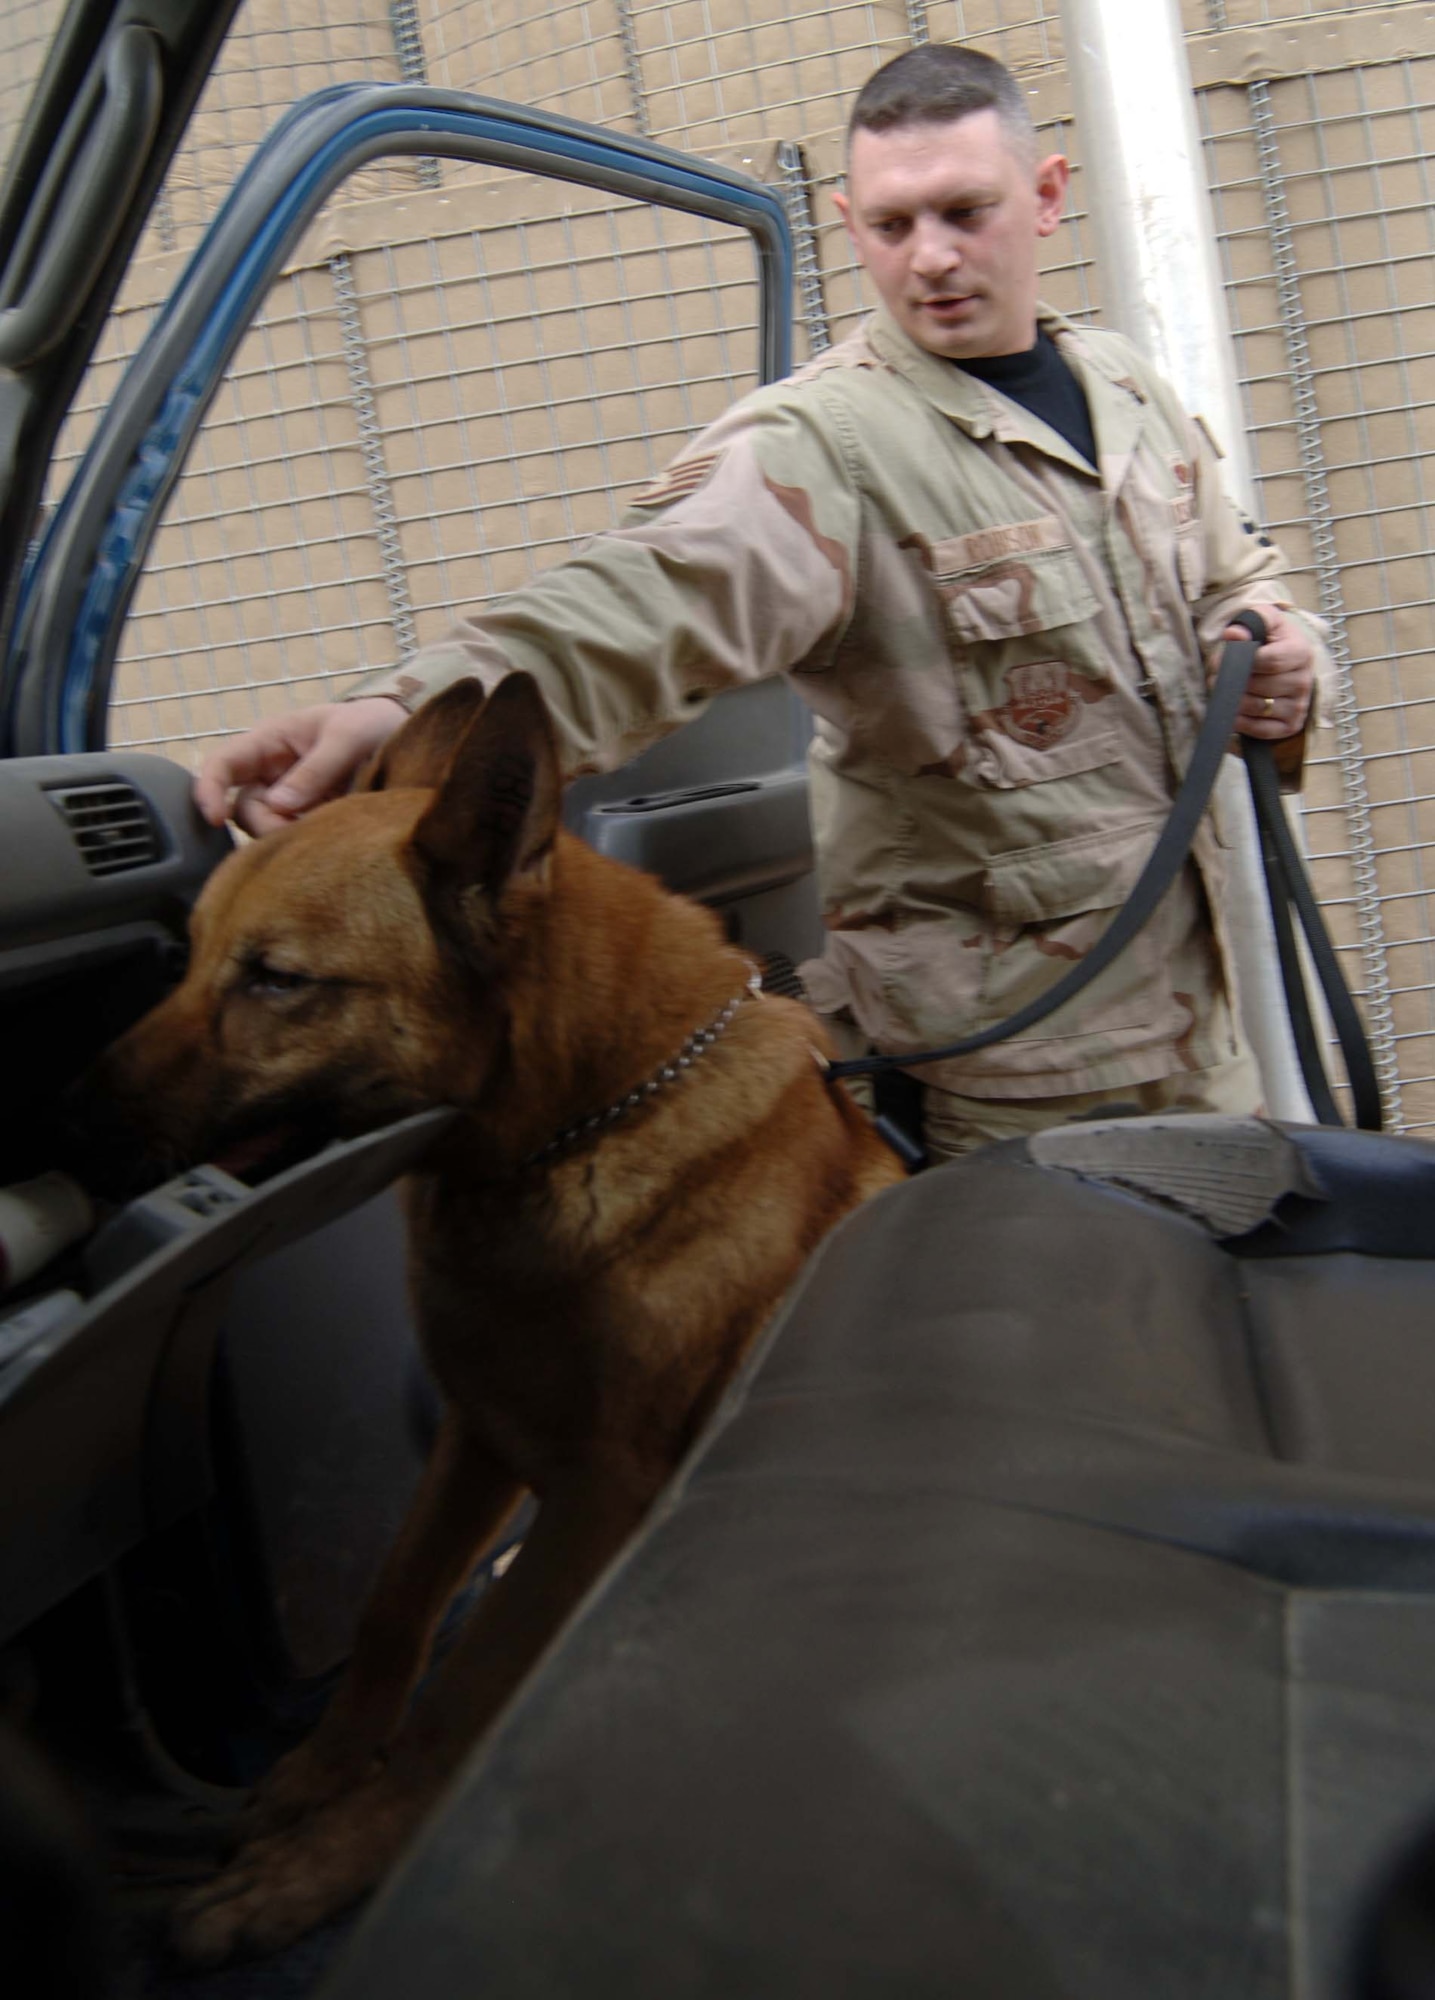 SATHER AIR BASE, Iraq – Staff Sgt. Jeremy Robison and his military working dog Zorro, both 447th Expeditionary Security Forces Squadron, inspect a vehicle for explosives and contraband at the search pit here. The pit processes more than 600 vehicles and 2,000 people a week. (U.S. Air Force photo/Tech. Sgt. Russell Wicke).